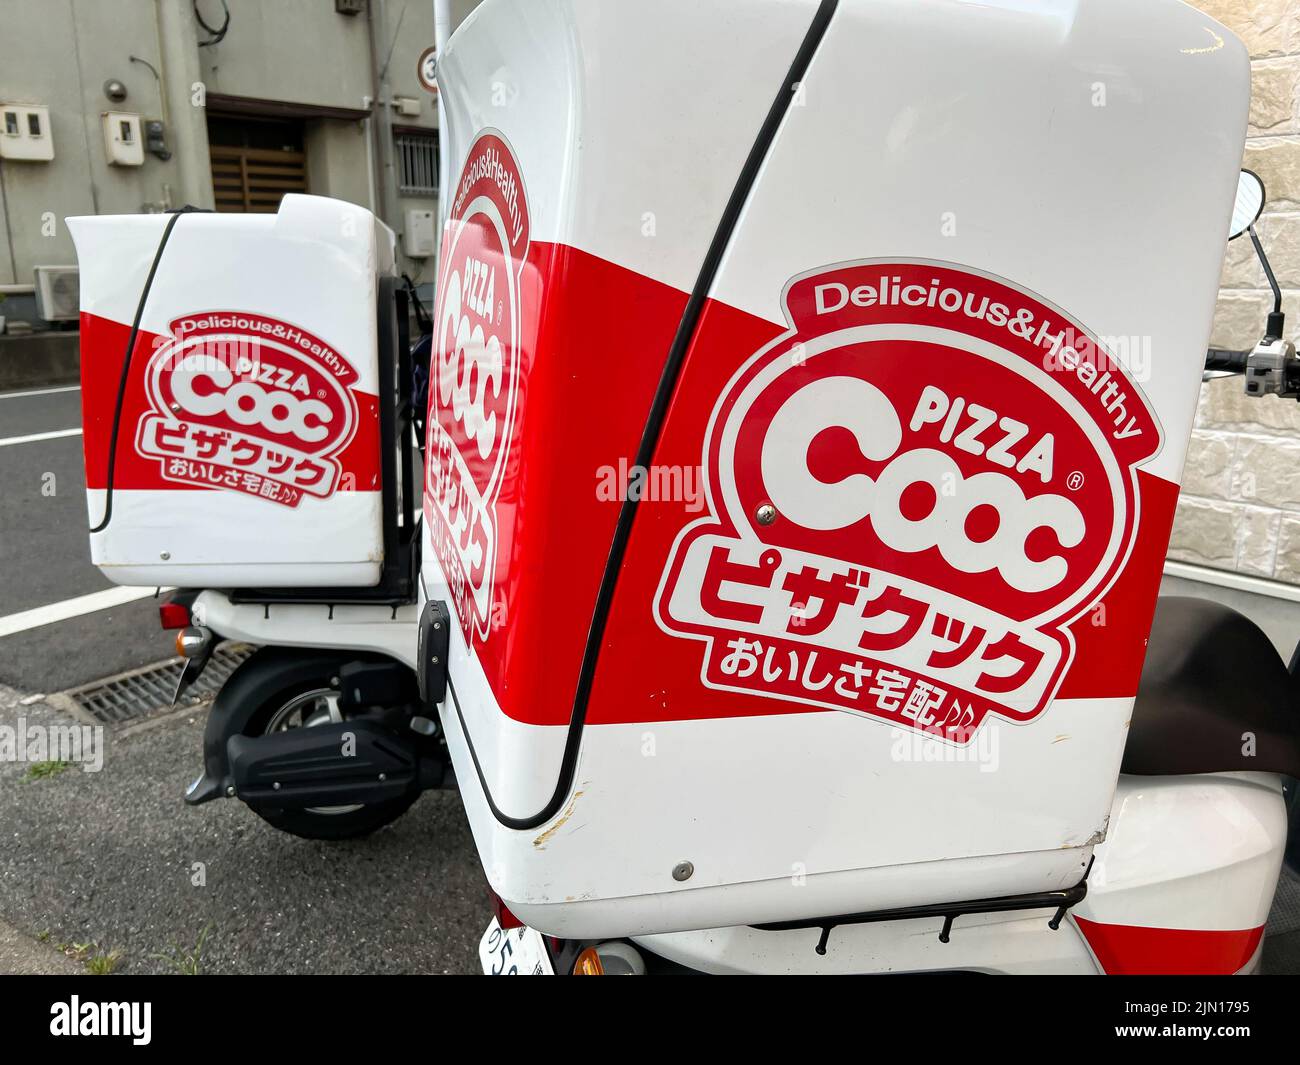 Pizza Cooc delivery moped scooters. Pizza Cooc is a popular pizza chain in Japan. Stock Photo